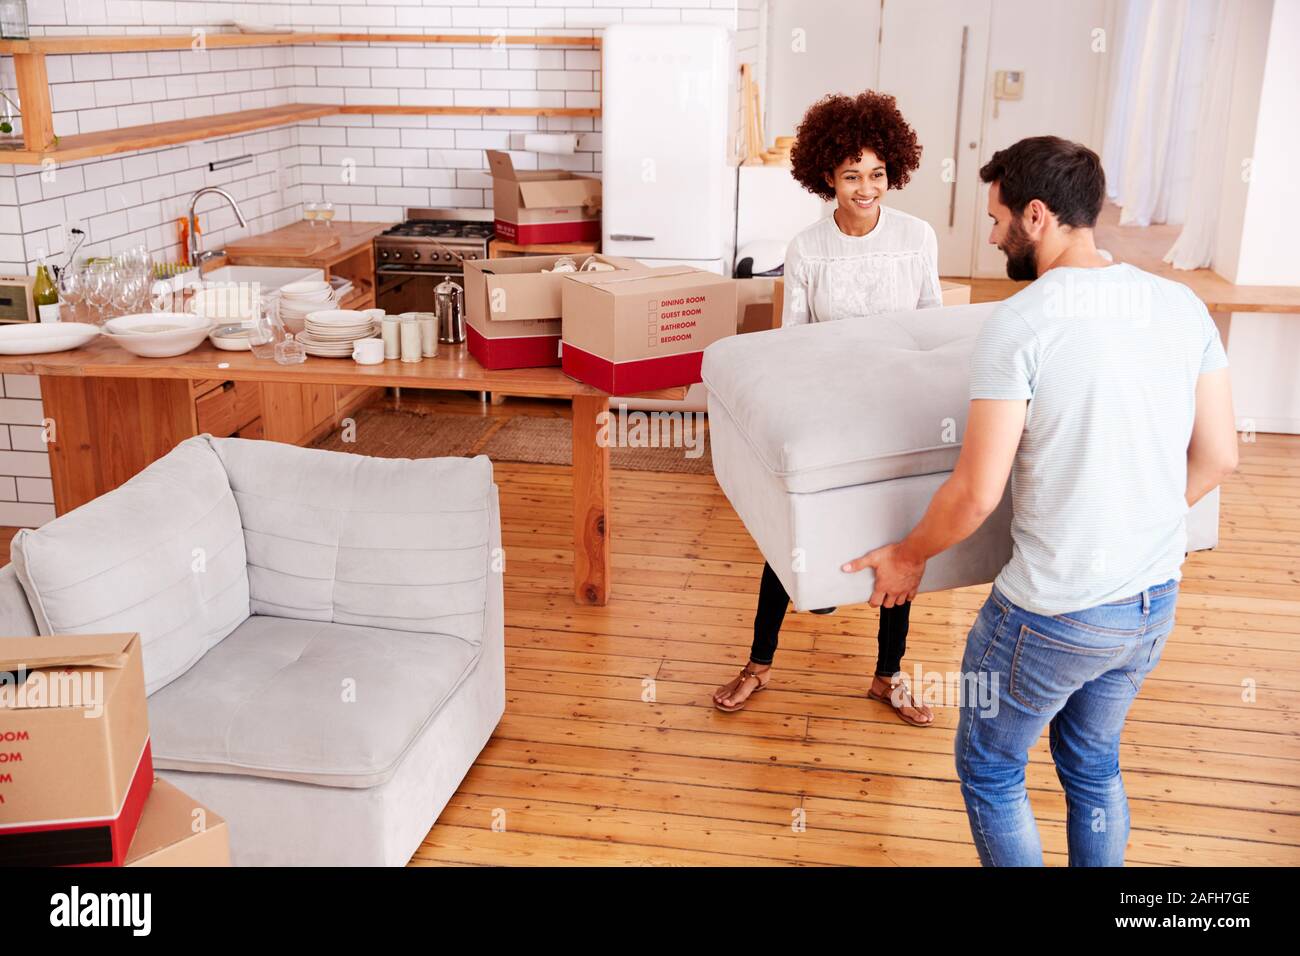 Smiling Couple Carrying Furniture Into New Home On Moving Day Stock Photo